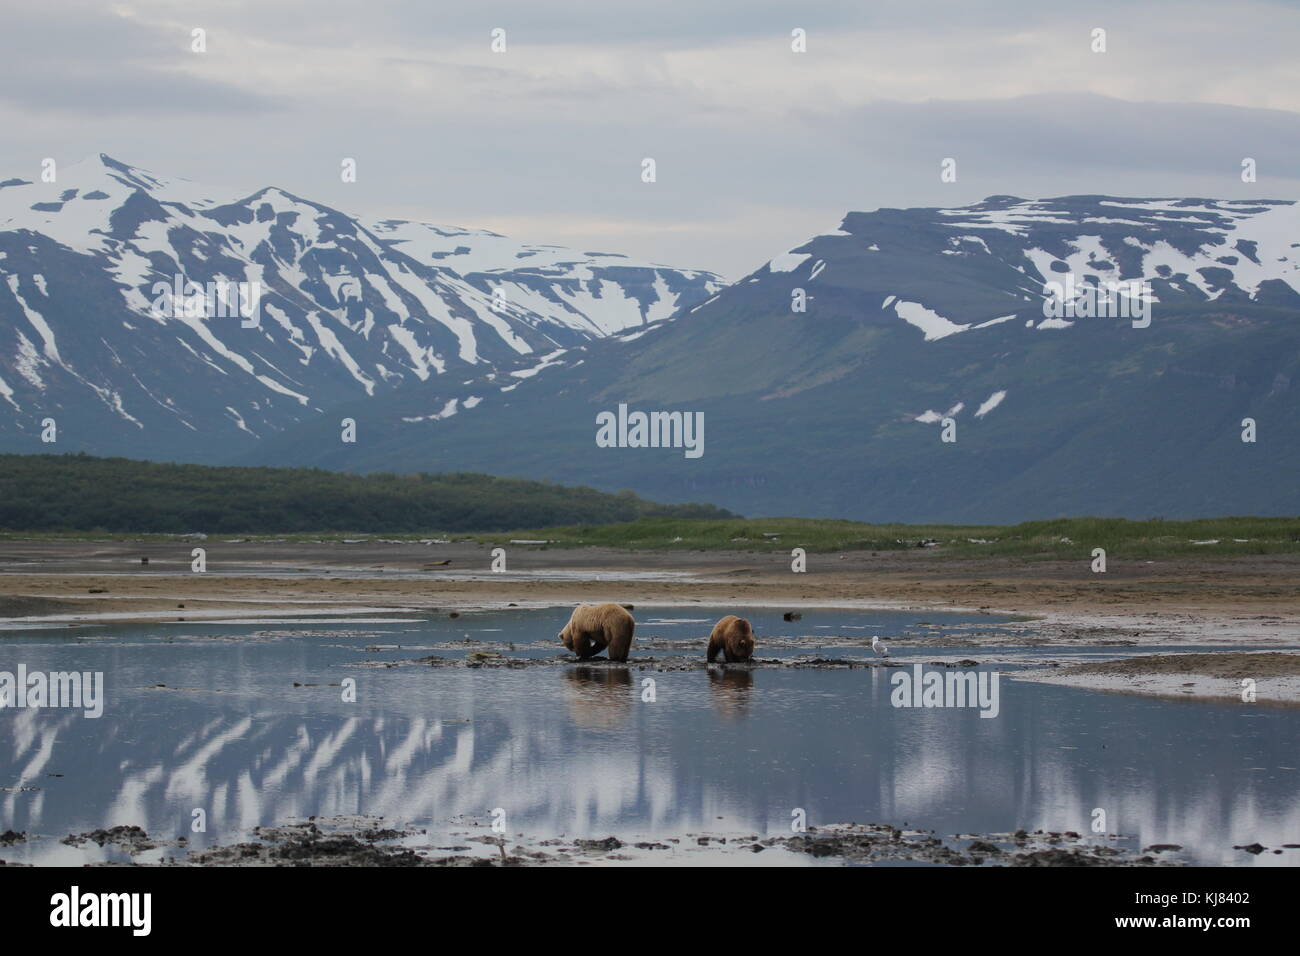 Momma and cub bears digging for clams with mountains in background at low tide in Hallo Bay, Katmai National Park, Alaska Stock Photo